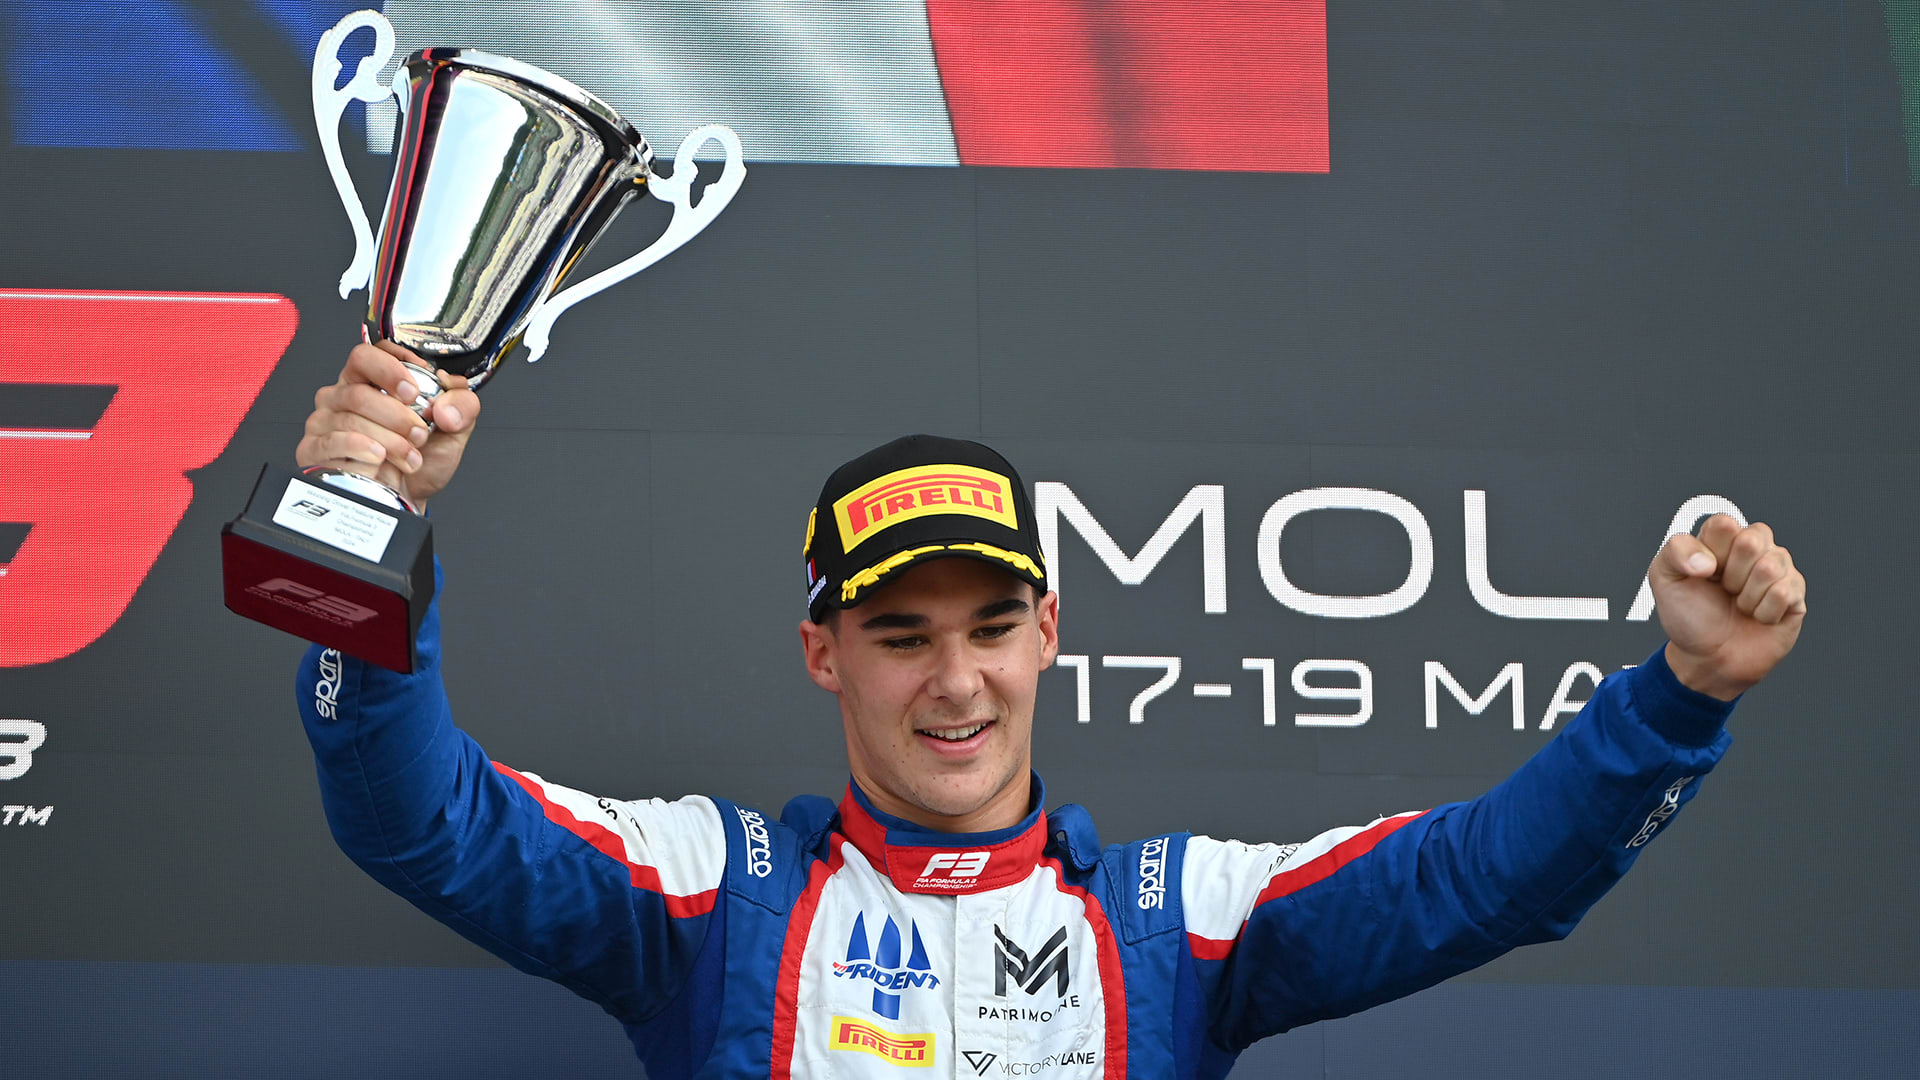 F3: Sami Meguetounif earns maiden F3 win in Feature Race at Imola